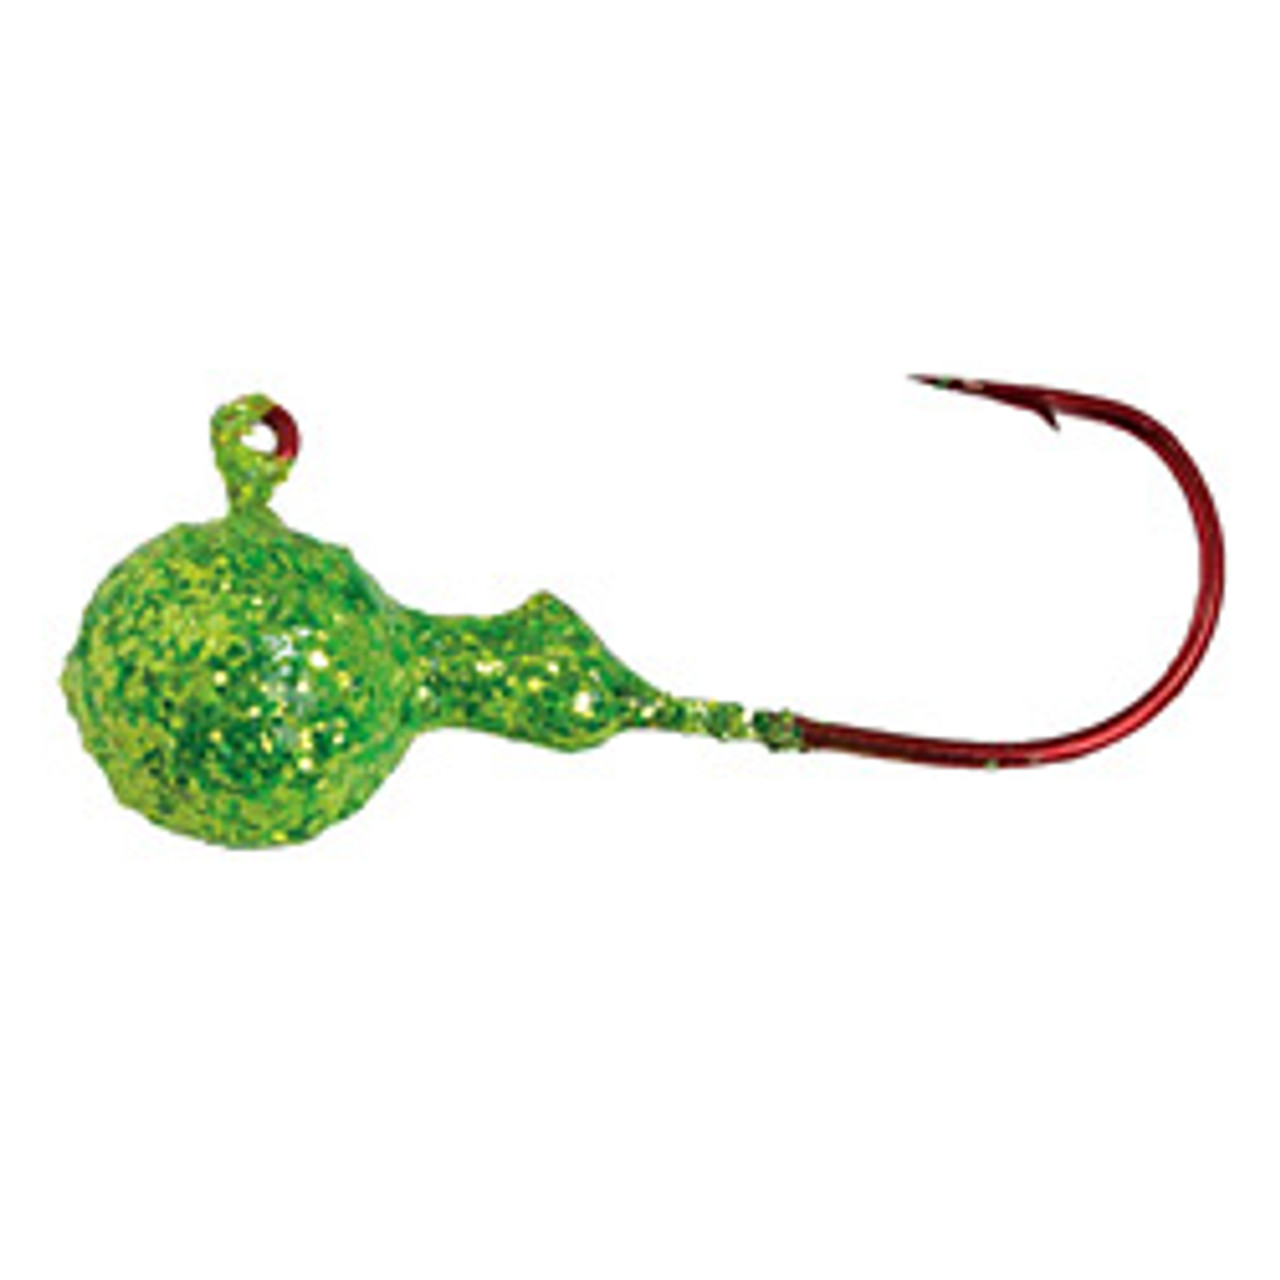 Glitter Jig 1/8 oz Round Jig Heads by Mission Tackle